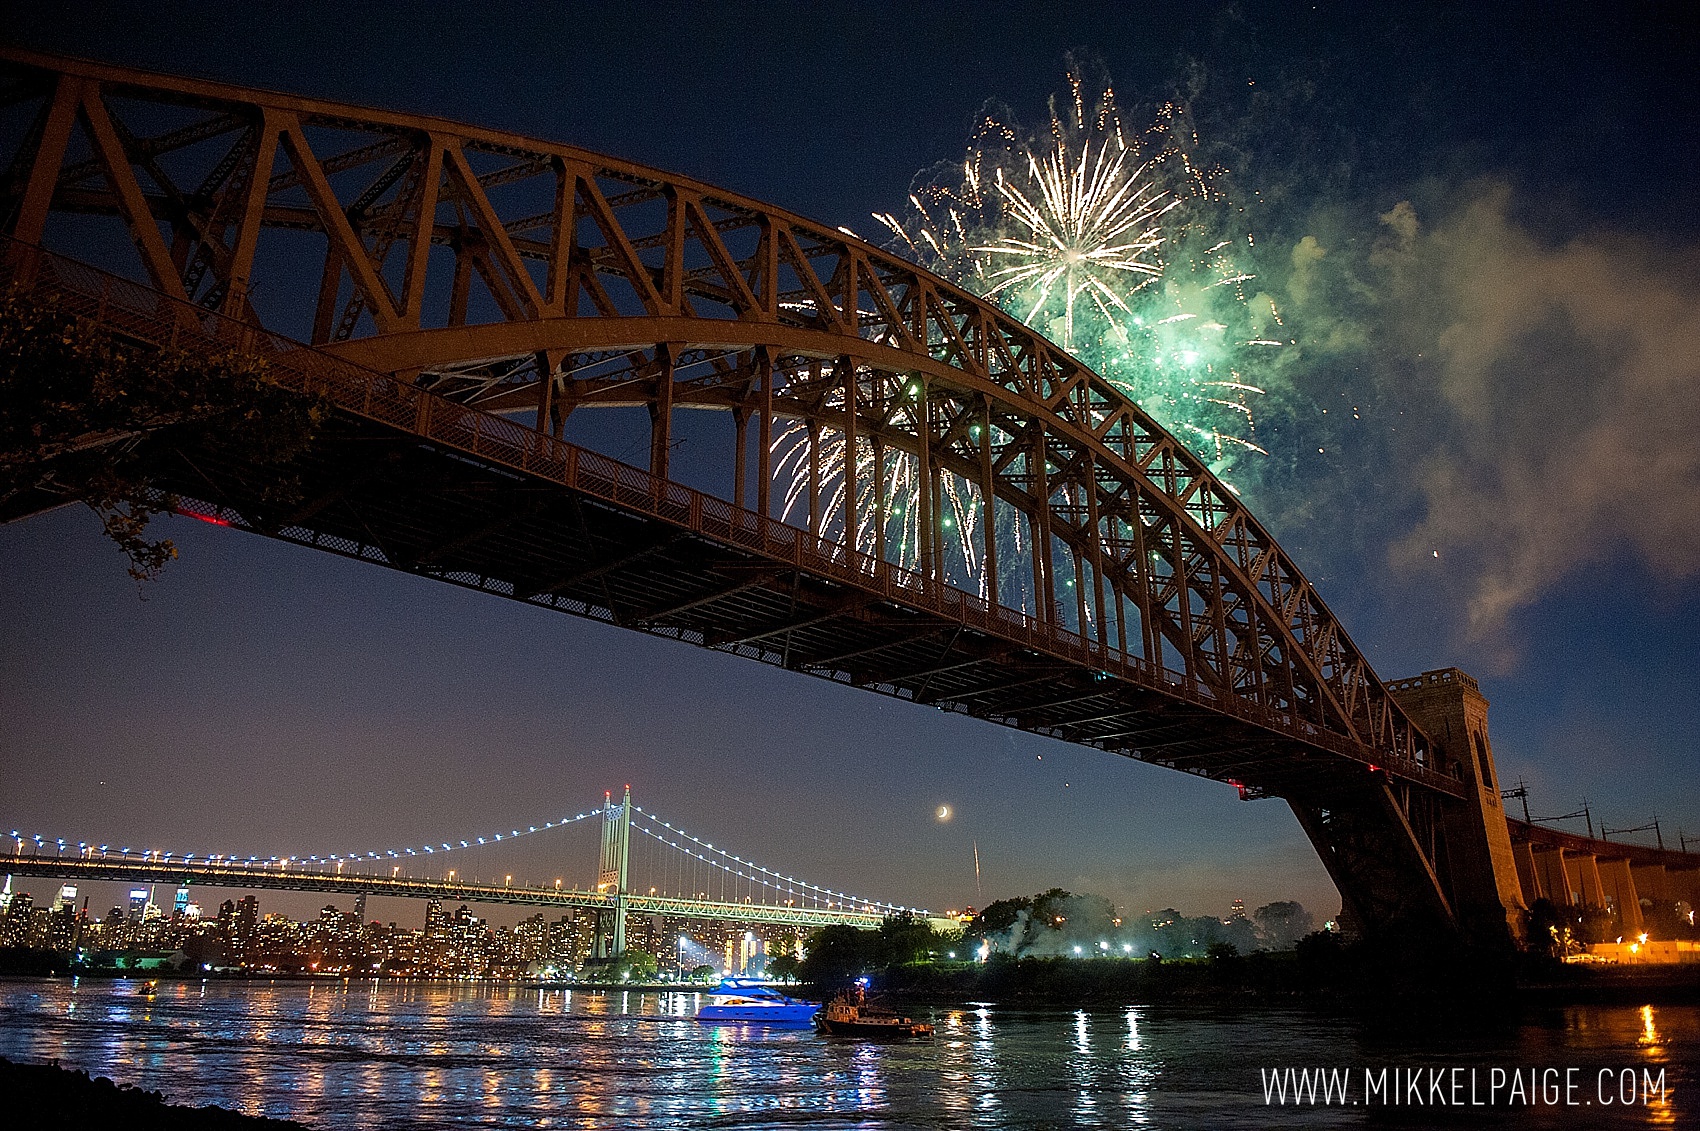 Fireworks photography tips for DSLR cameras by Mikkel Paige Photography. Perfect for the Fourth of July!